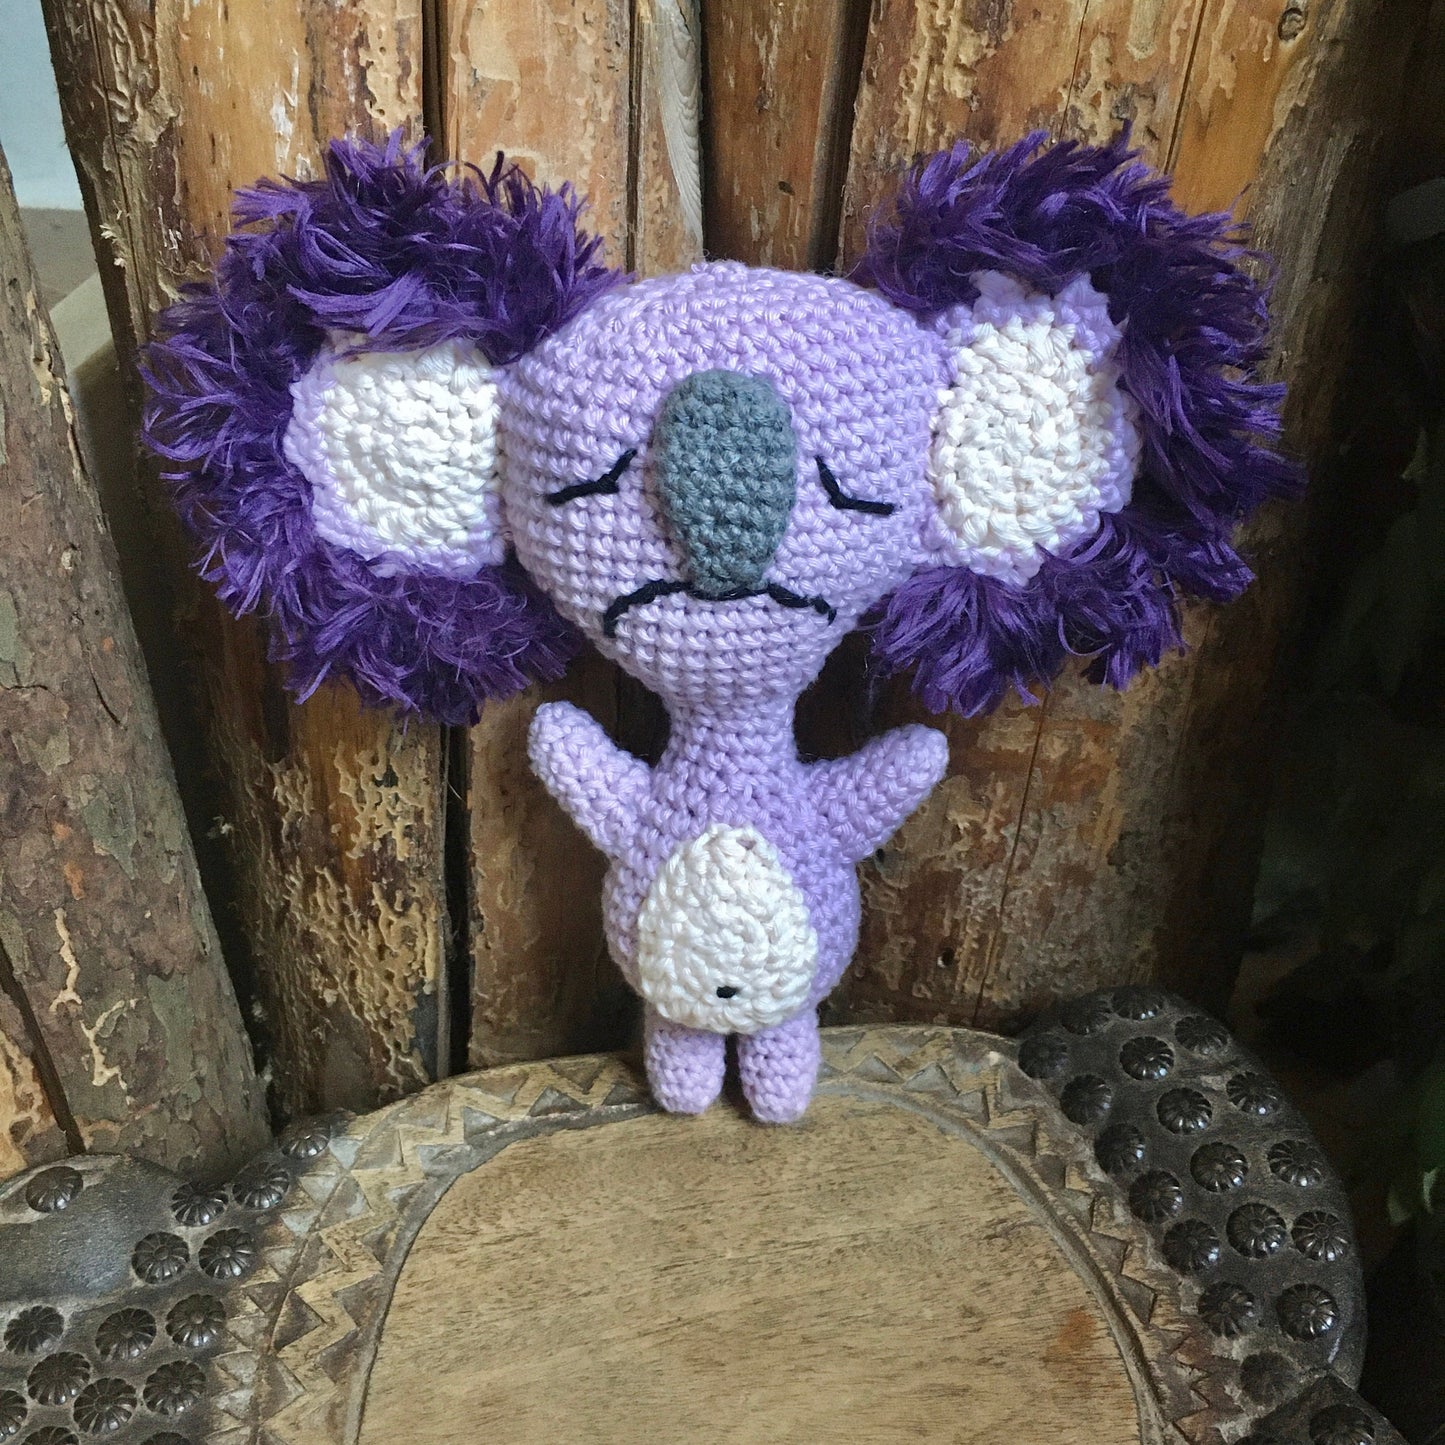 The Koa-Lala, crochet boss to download, French and English PDF, a little koala with 2 faces ... A joyful side and a sadder side.